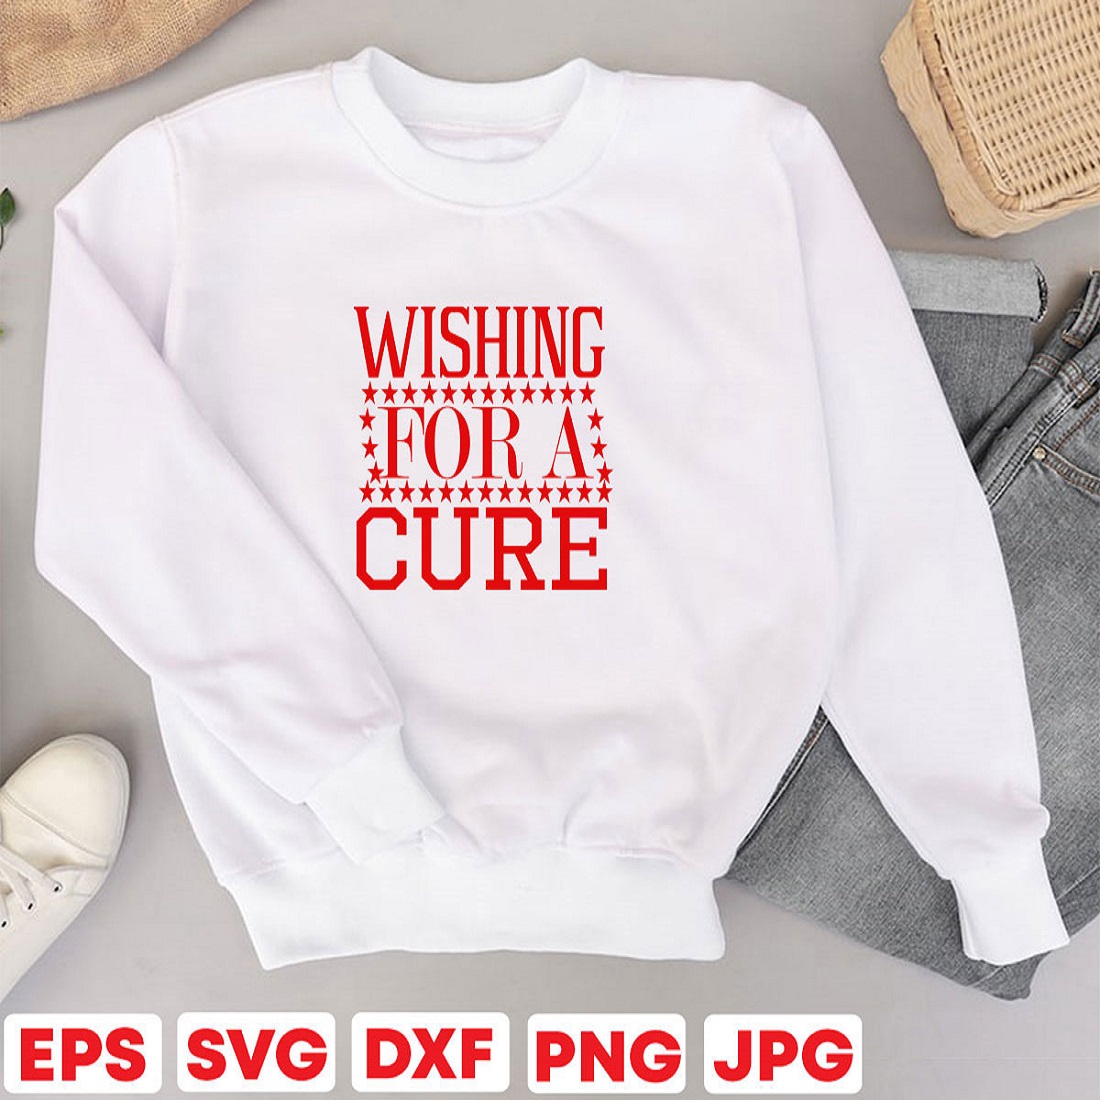 wishing for a cure jj 792